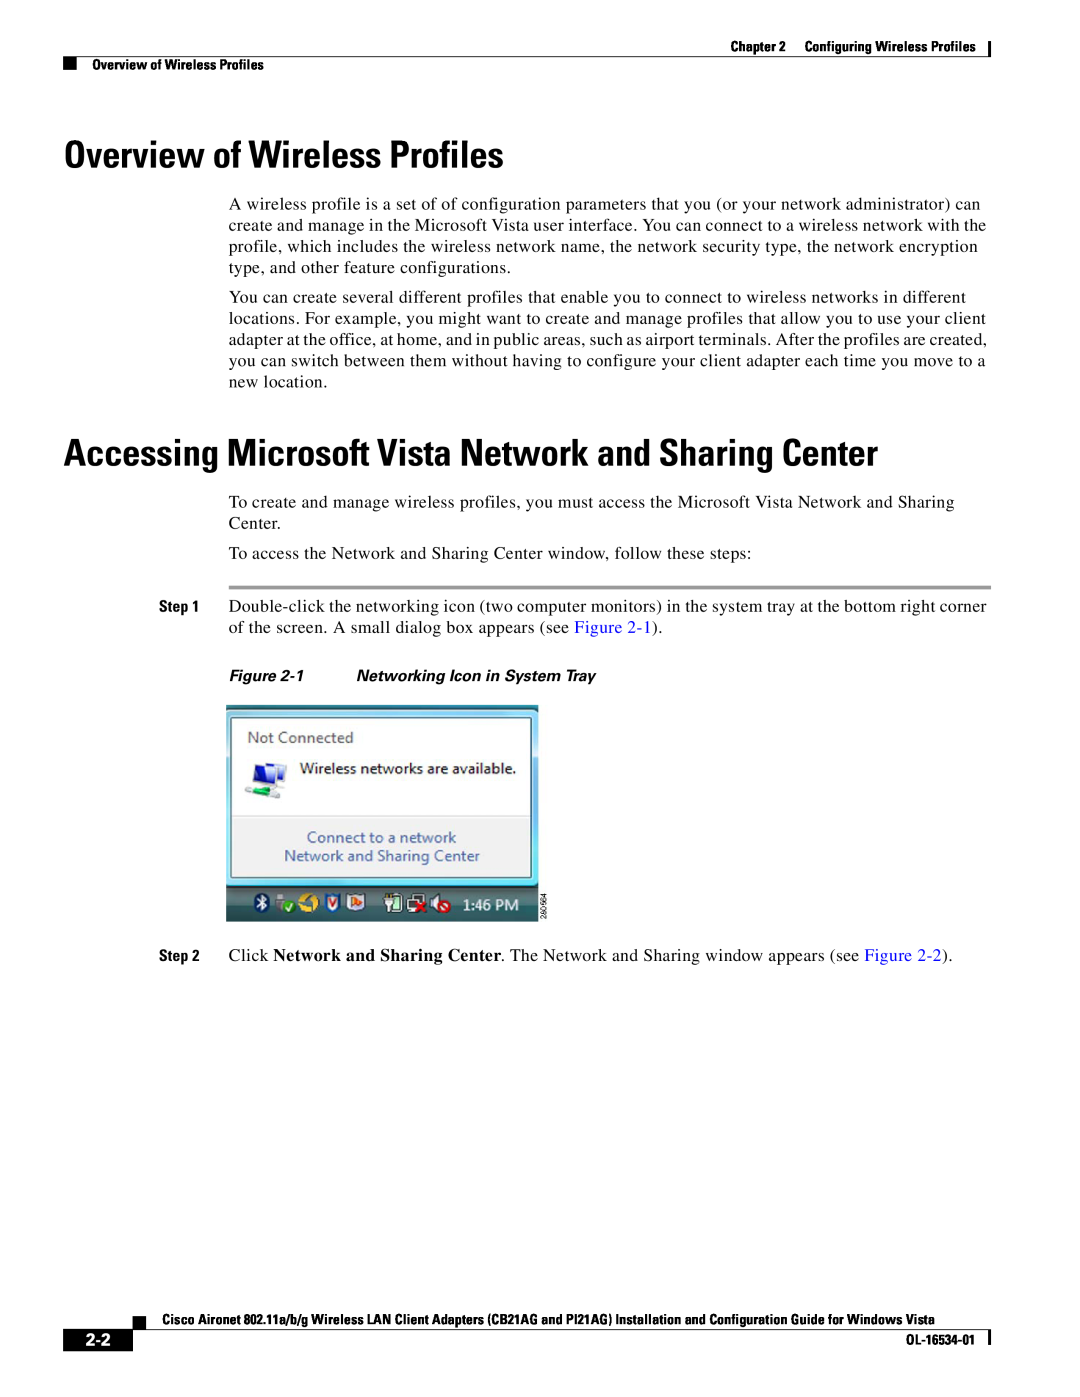 Cisco Systems PI21AG, CB21AG manual Overview of Wireless Profiles, Accessing Microsoft Vista Network and Sharing Center 